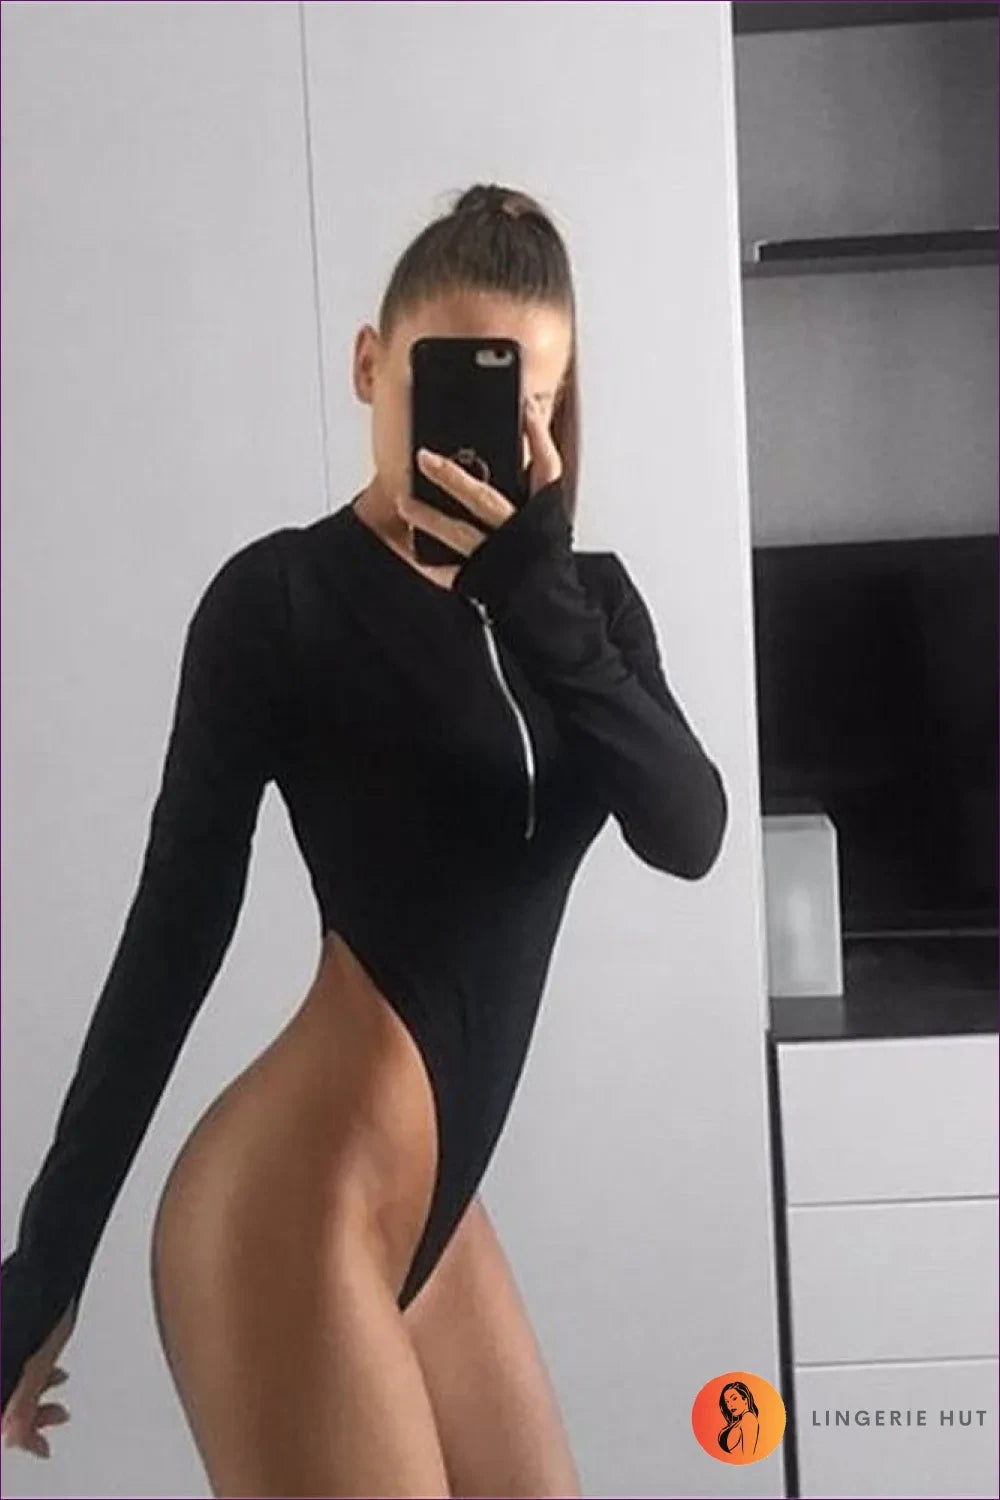 Get Ready To Turn Heads With Our v Neck Zip High Cut Long Sleeve Thong Bodysuit. Feel Both Sexy